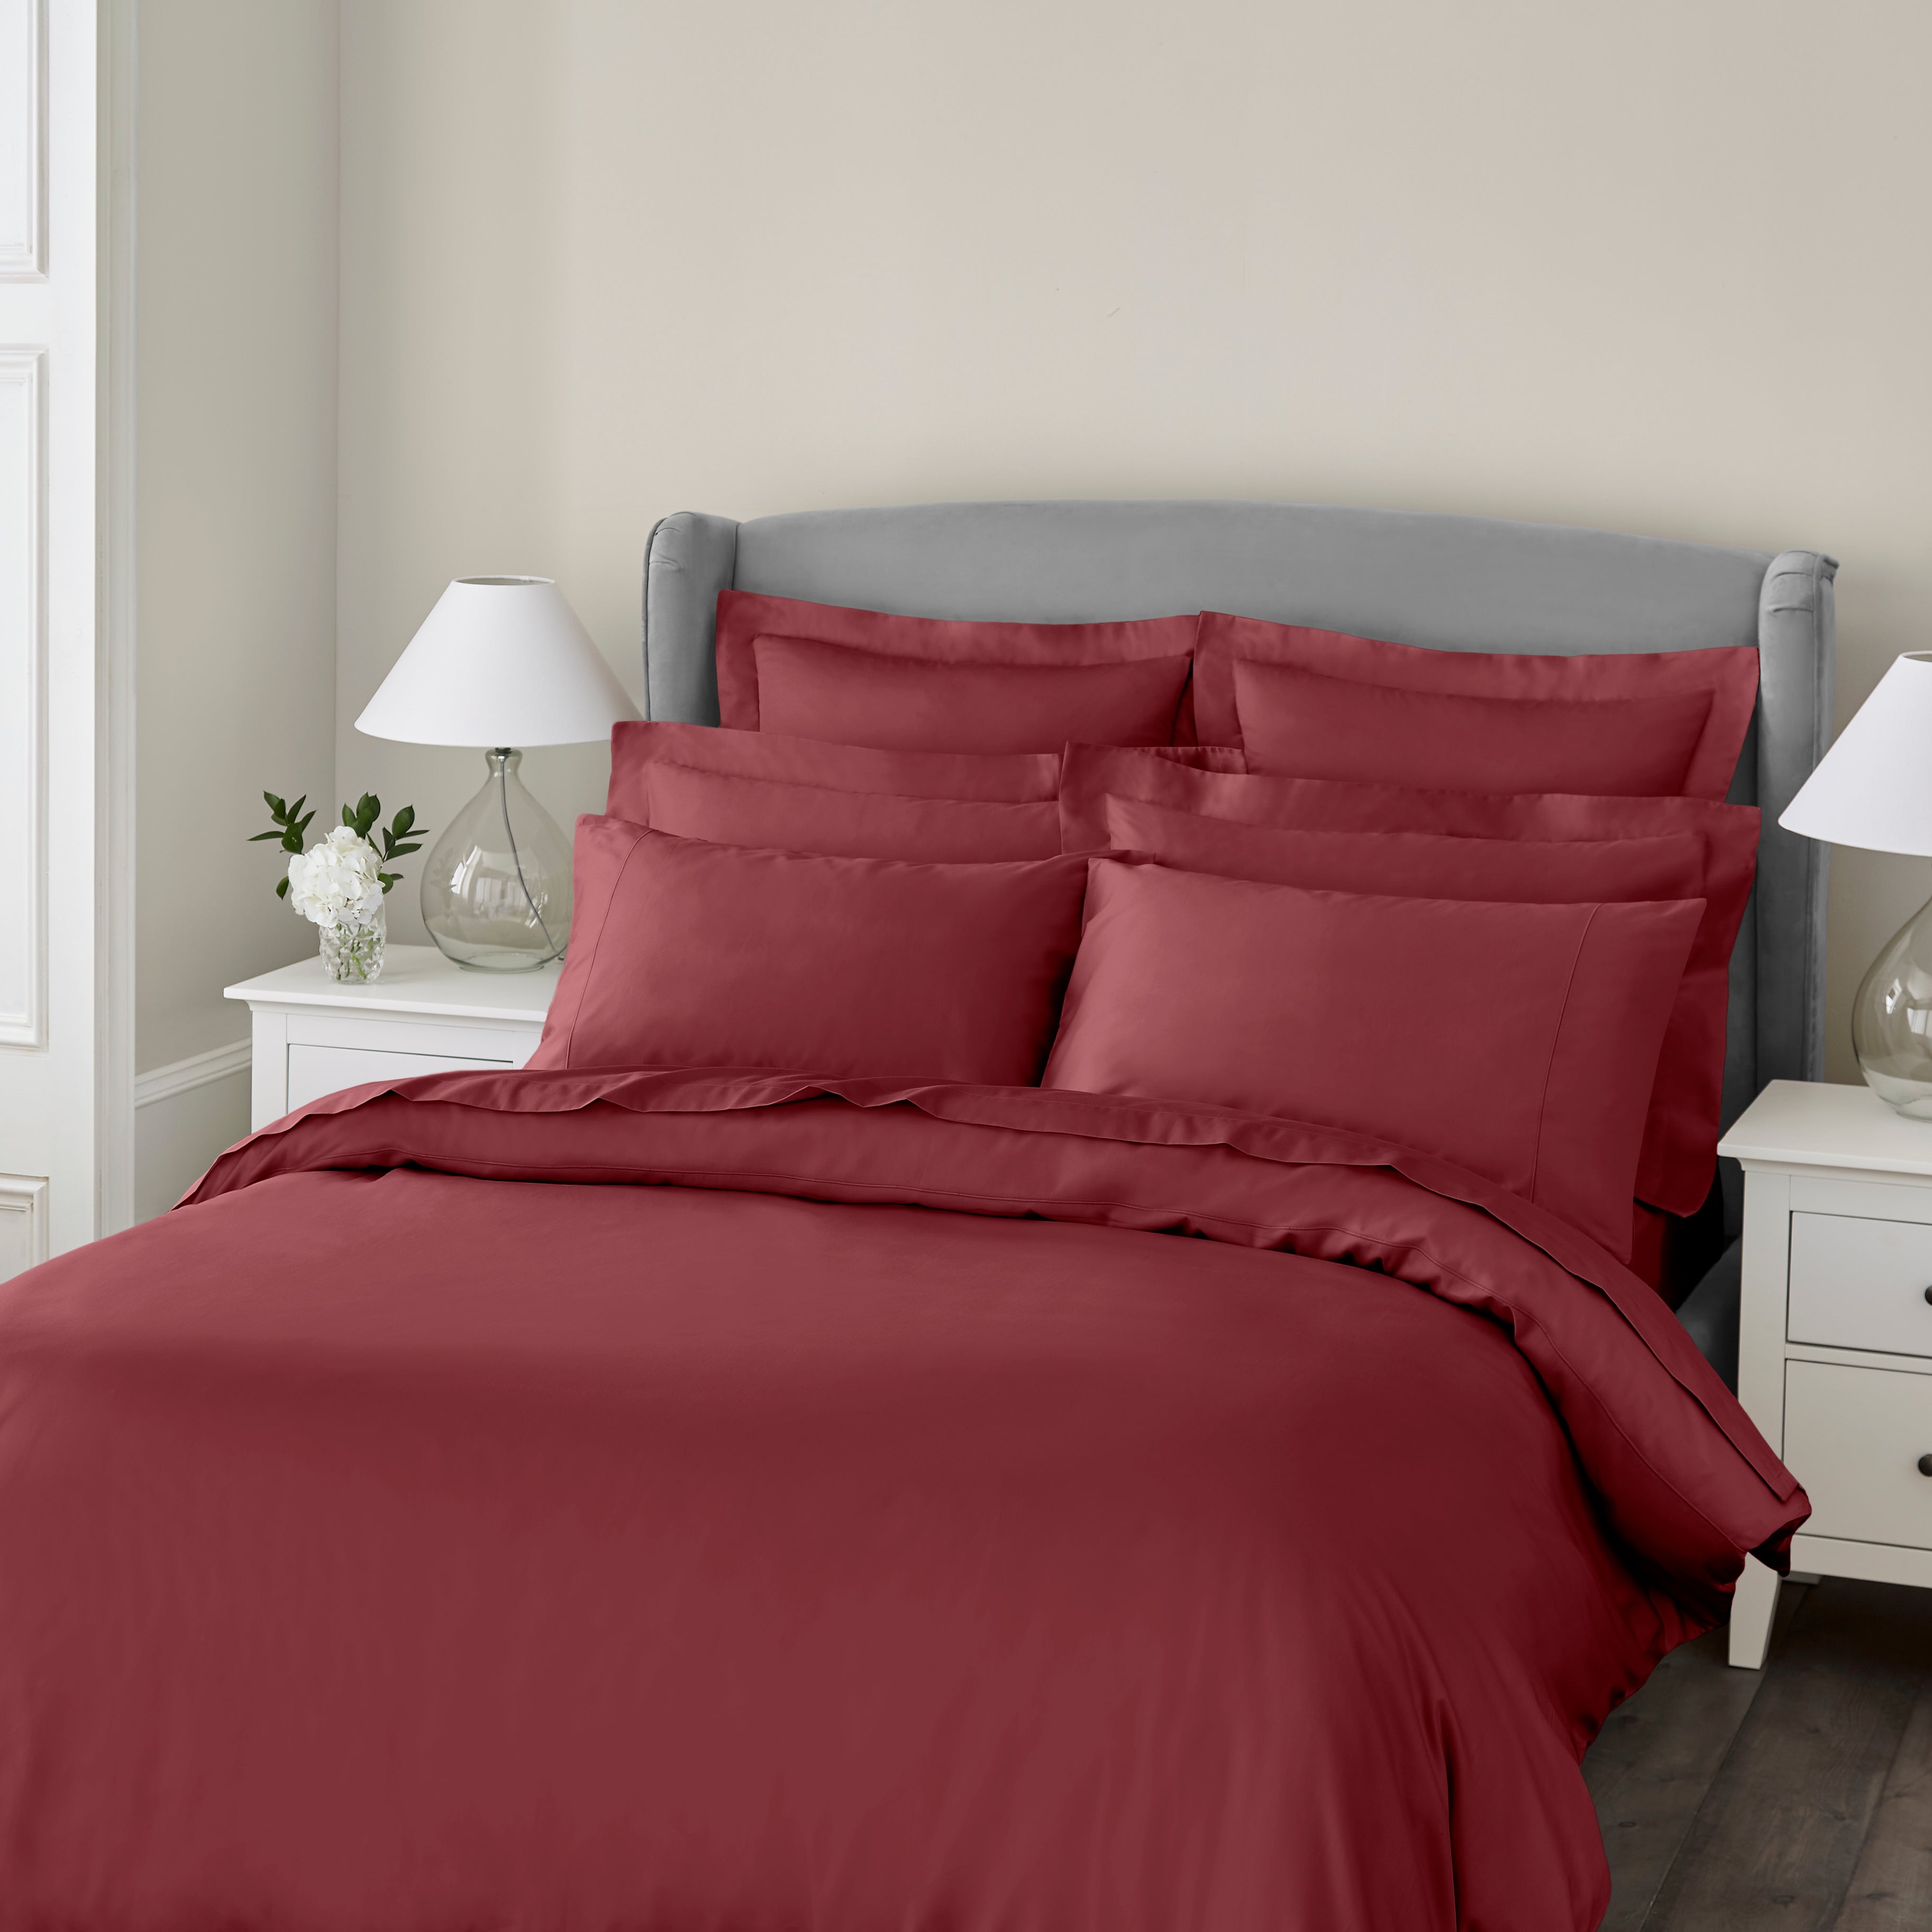 Image of Dorma Egyptian Cotton 400 Thread Count Percale Duvet Cover Red Dark Red